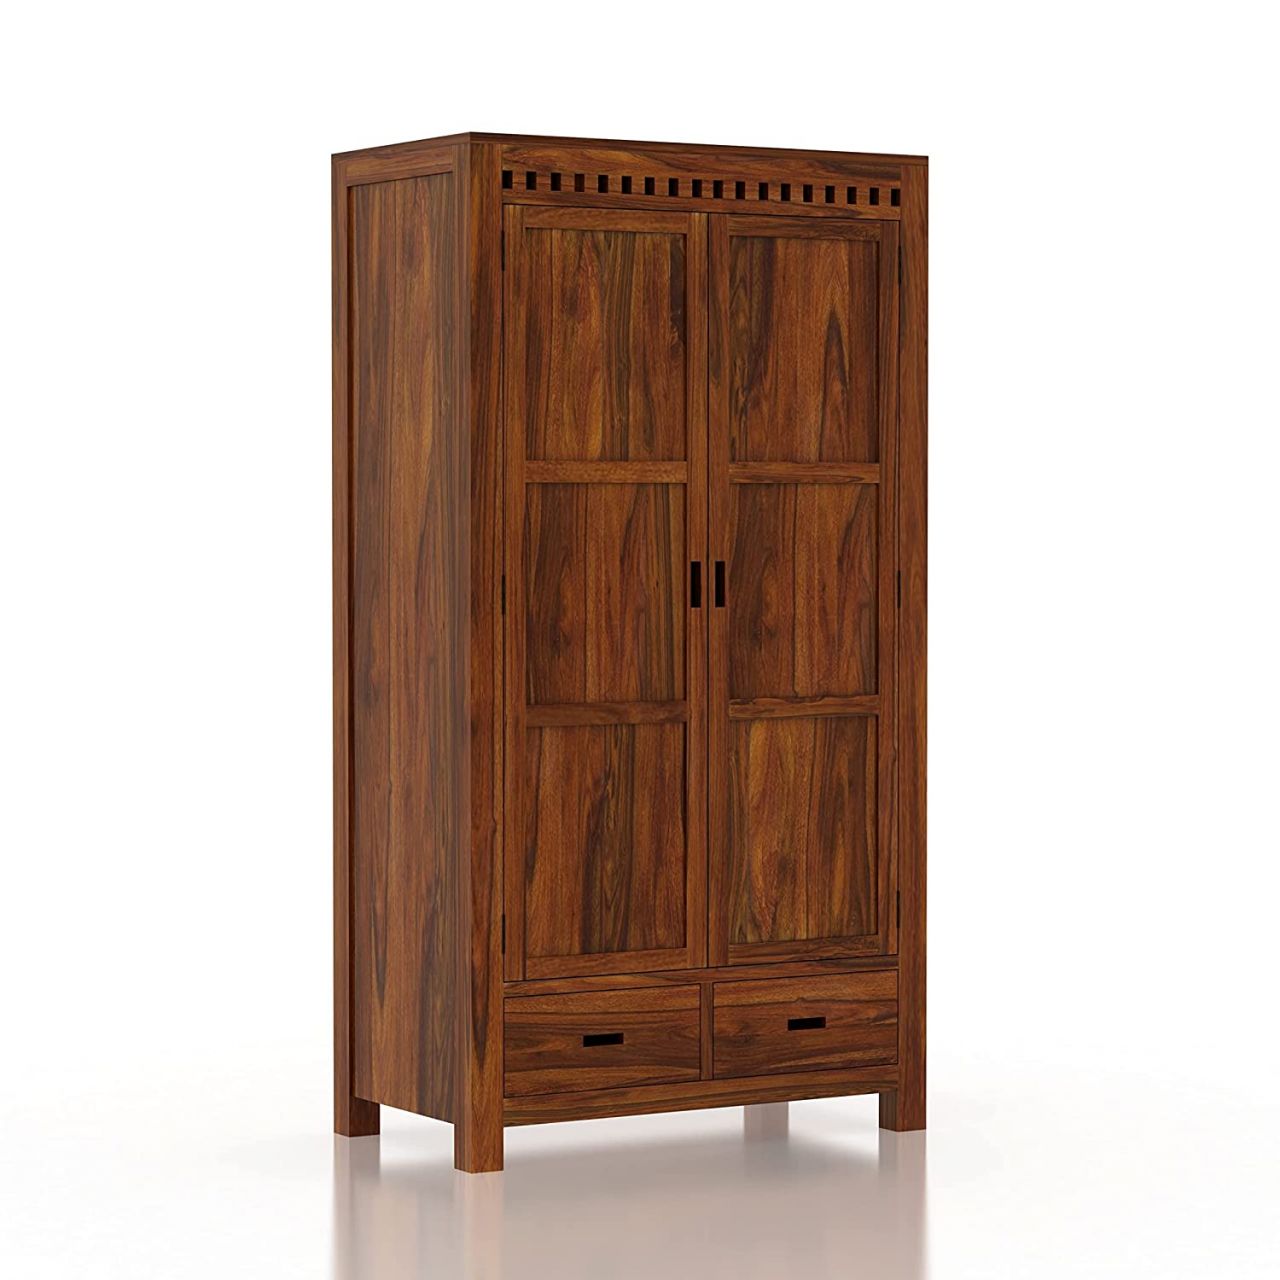 Aaram By Zebrs Solid Sheesham Wood Armania Dual Storage Wardrobe with Door and Drawer for Bedroom Living Room Home Almirah for Clothes Wooden Furniture (Natural Finish)